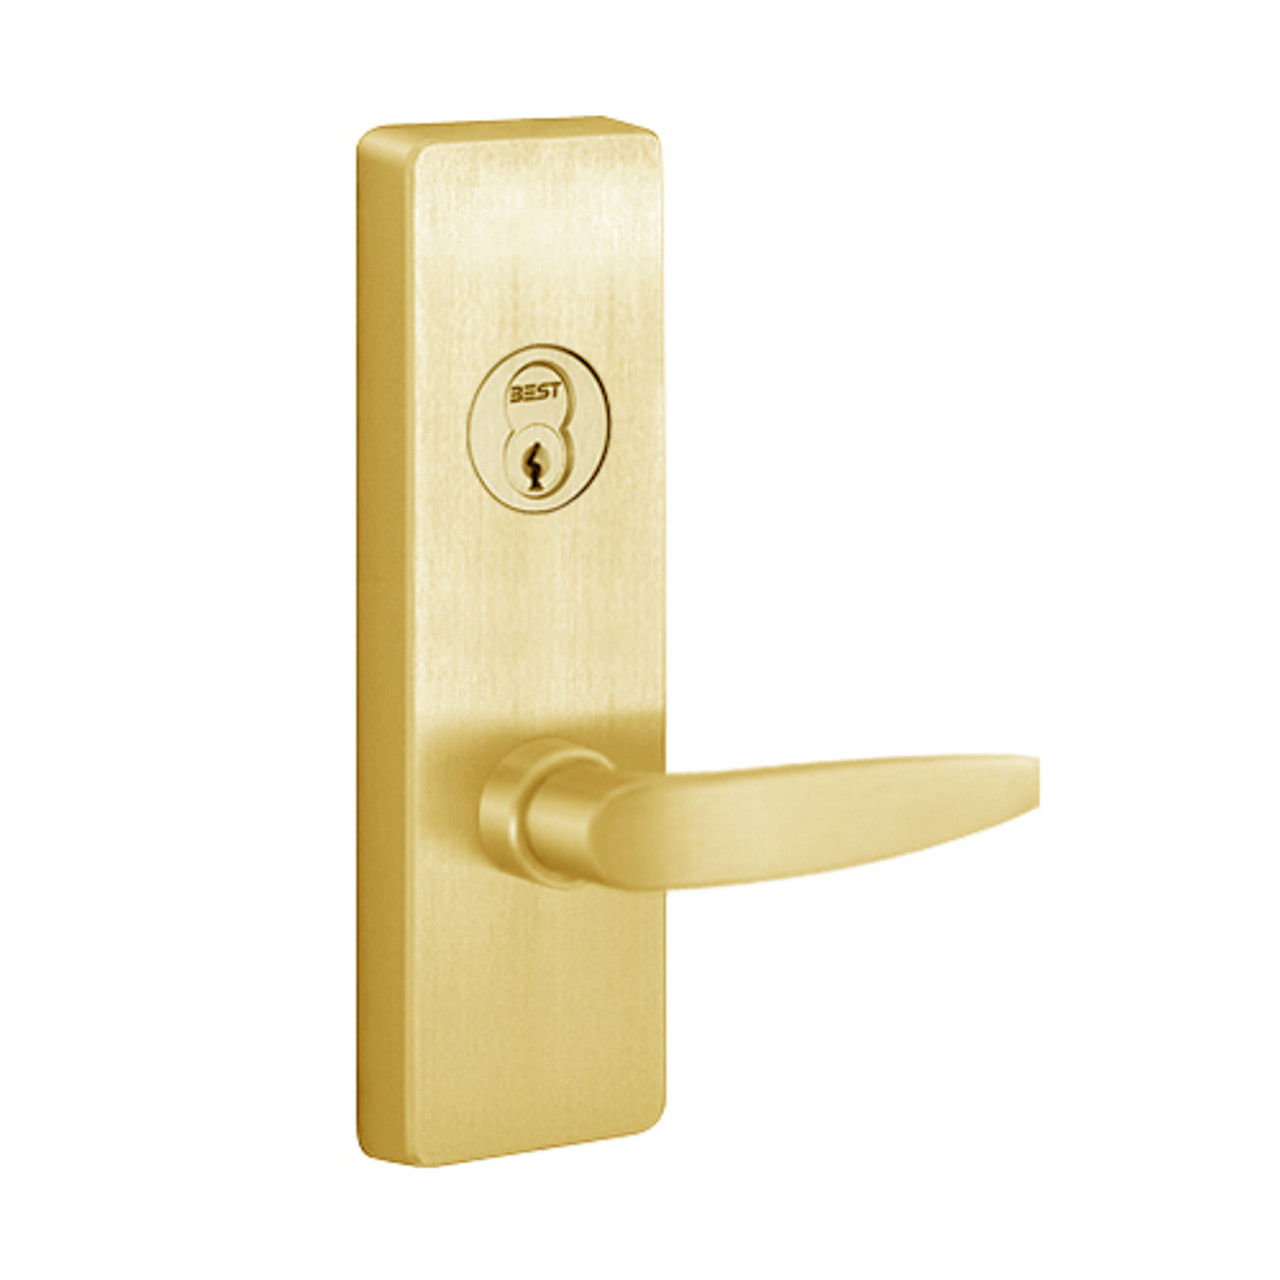 VM4908B-605-LHR PHI Key Controls Lever Vandal Resistant Trim with B Lever Design for Apex and Olympian Series Exit Device in Bright Brass Finish